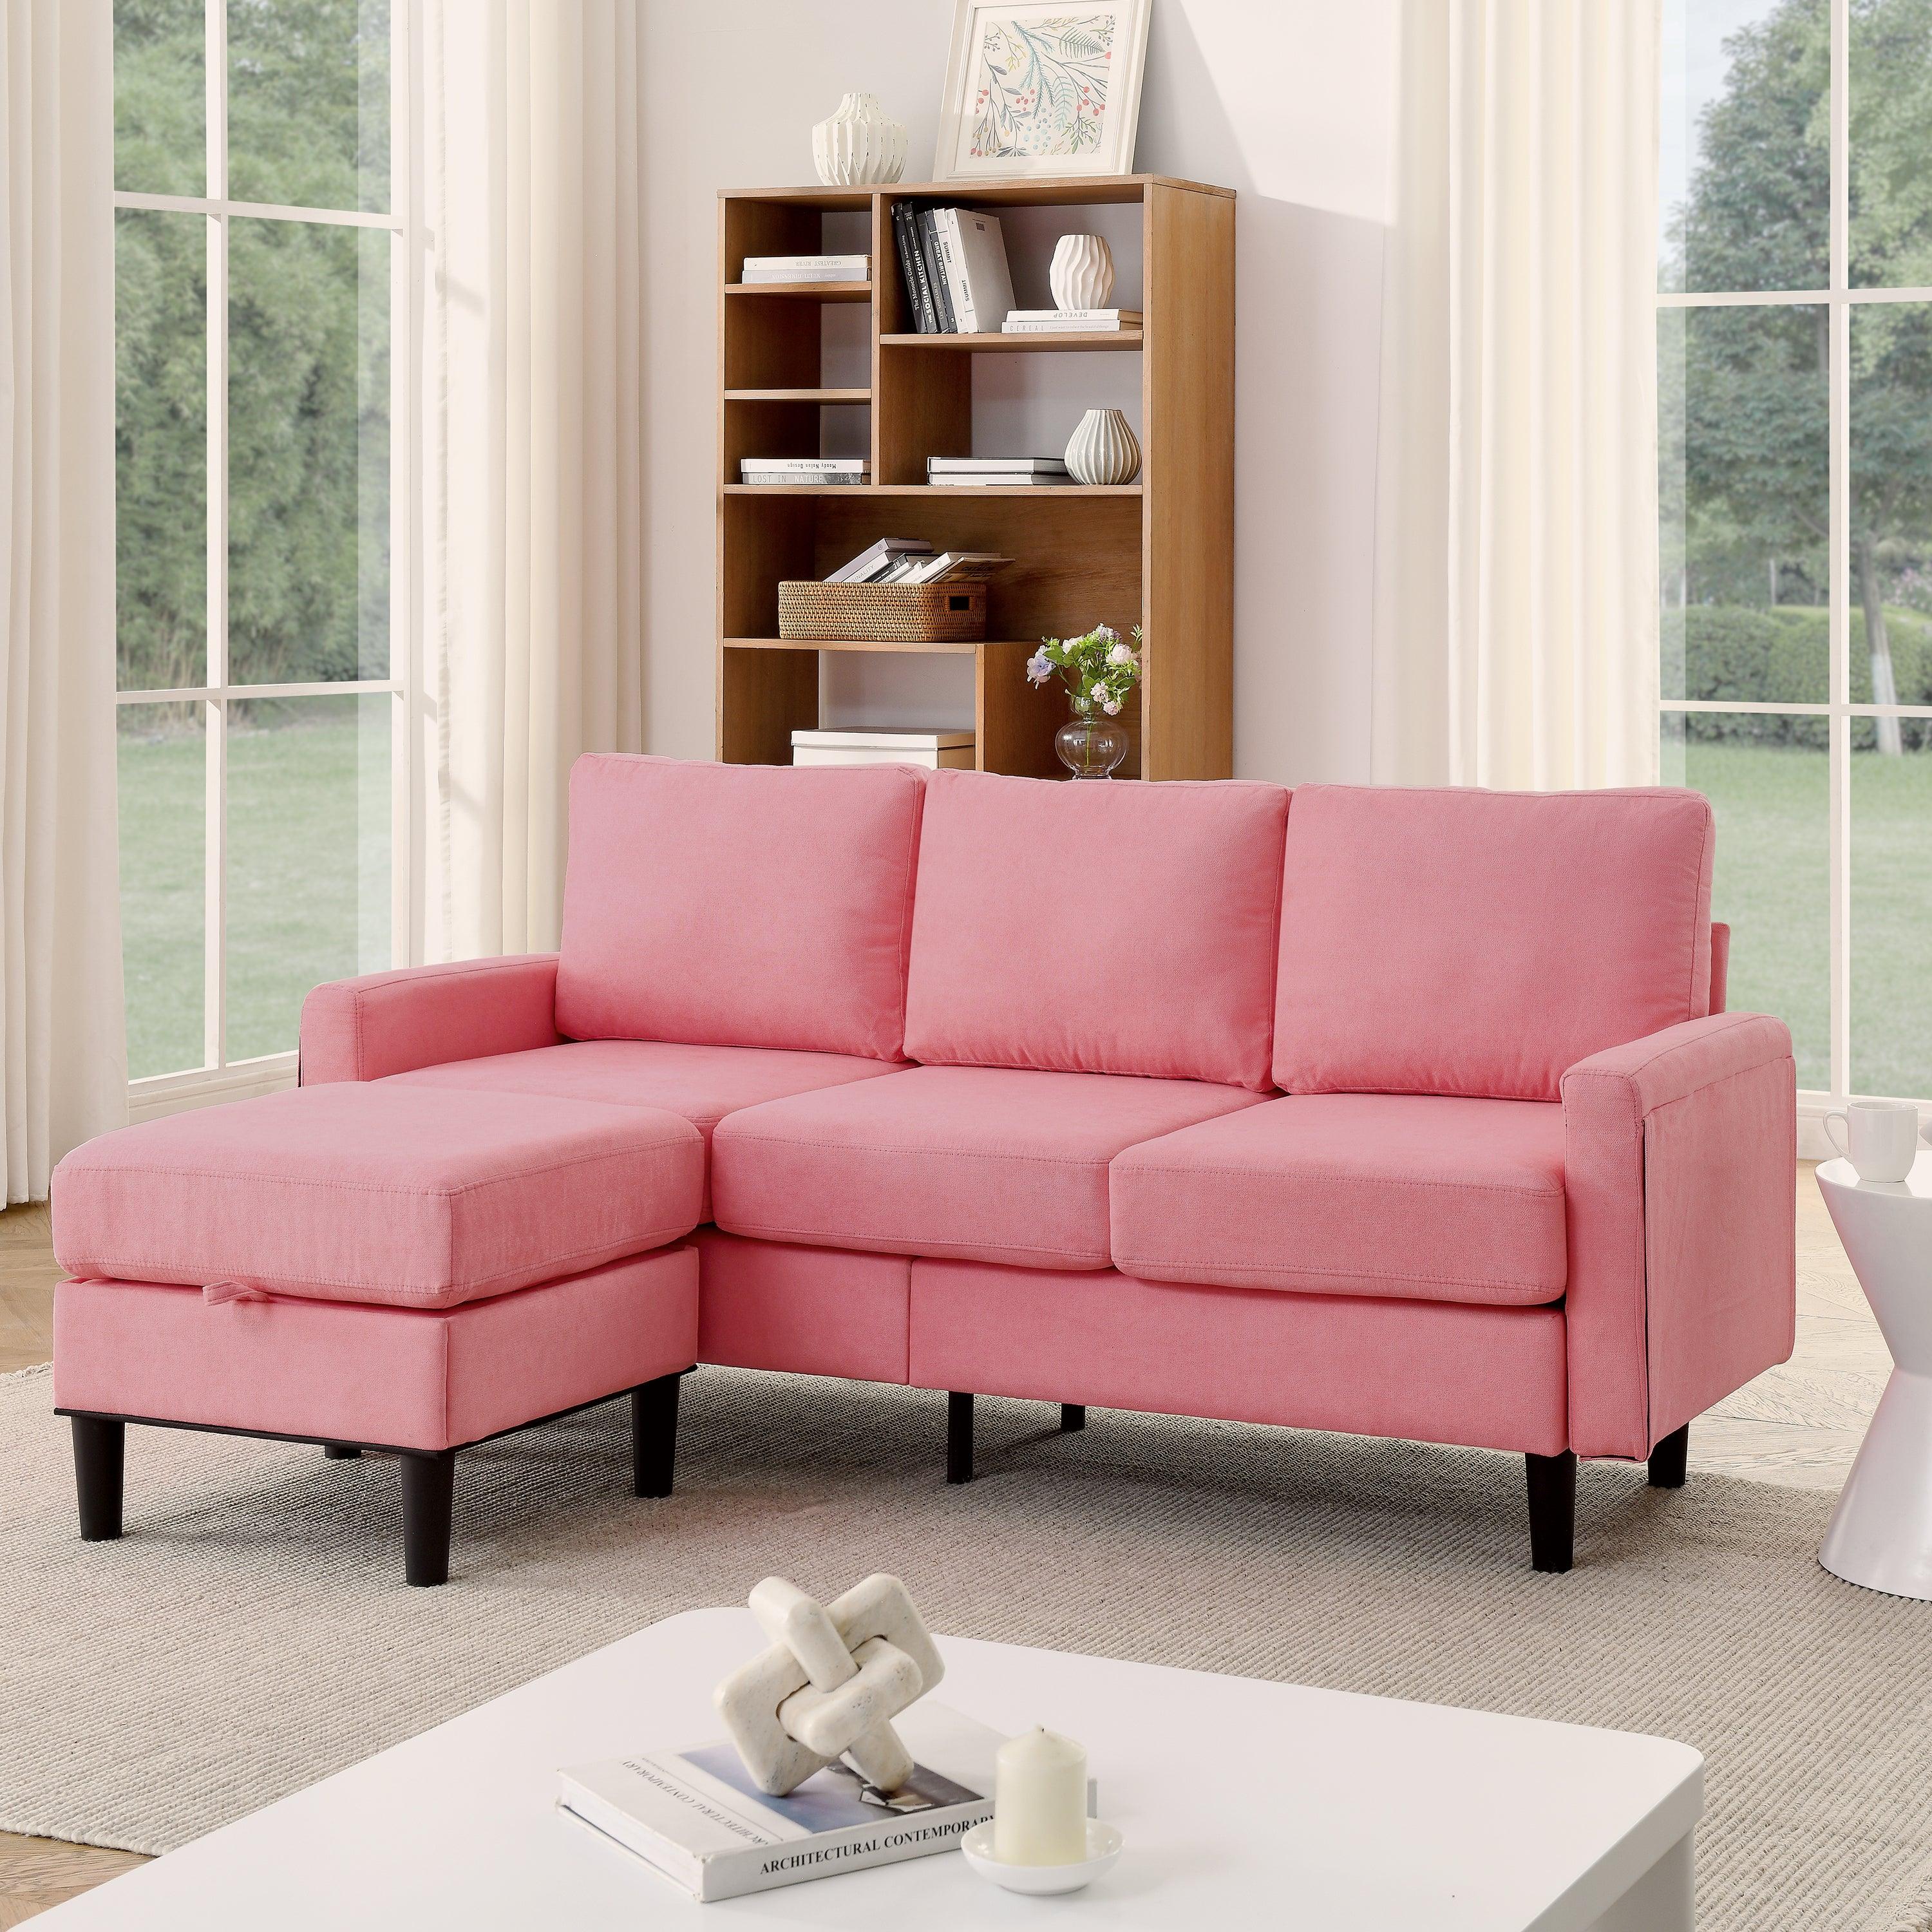 🆓🚛 Upholstered Sectional Sofa Couch, L Shaped Couch With Storage Reversible Ottoman Bench 3 Seater for Living Room, Apartment, Compact Spaces, Fabric Pink